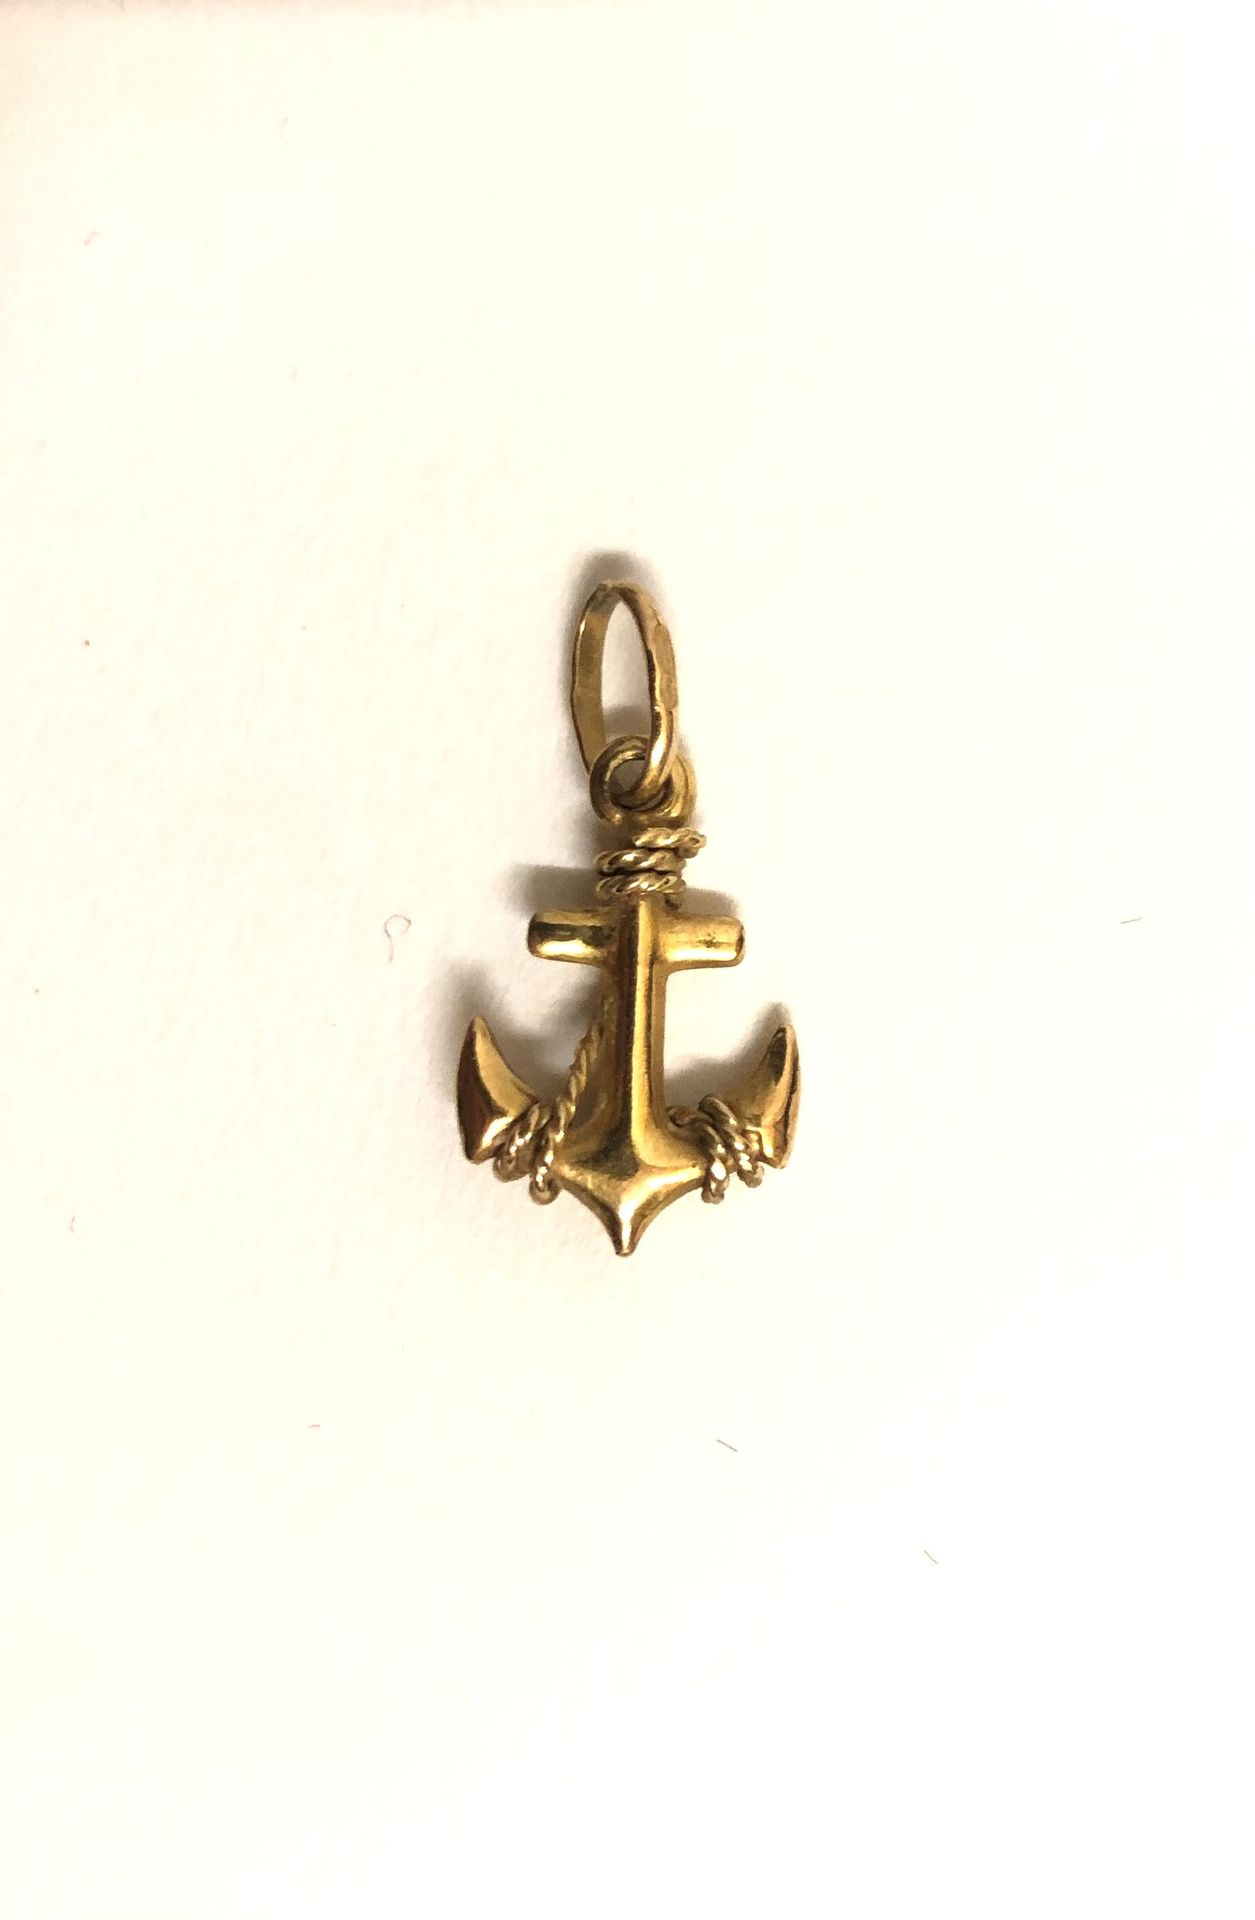 Null Small PENDANT in gilded metal representing an anchor. Length: 15 mm.